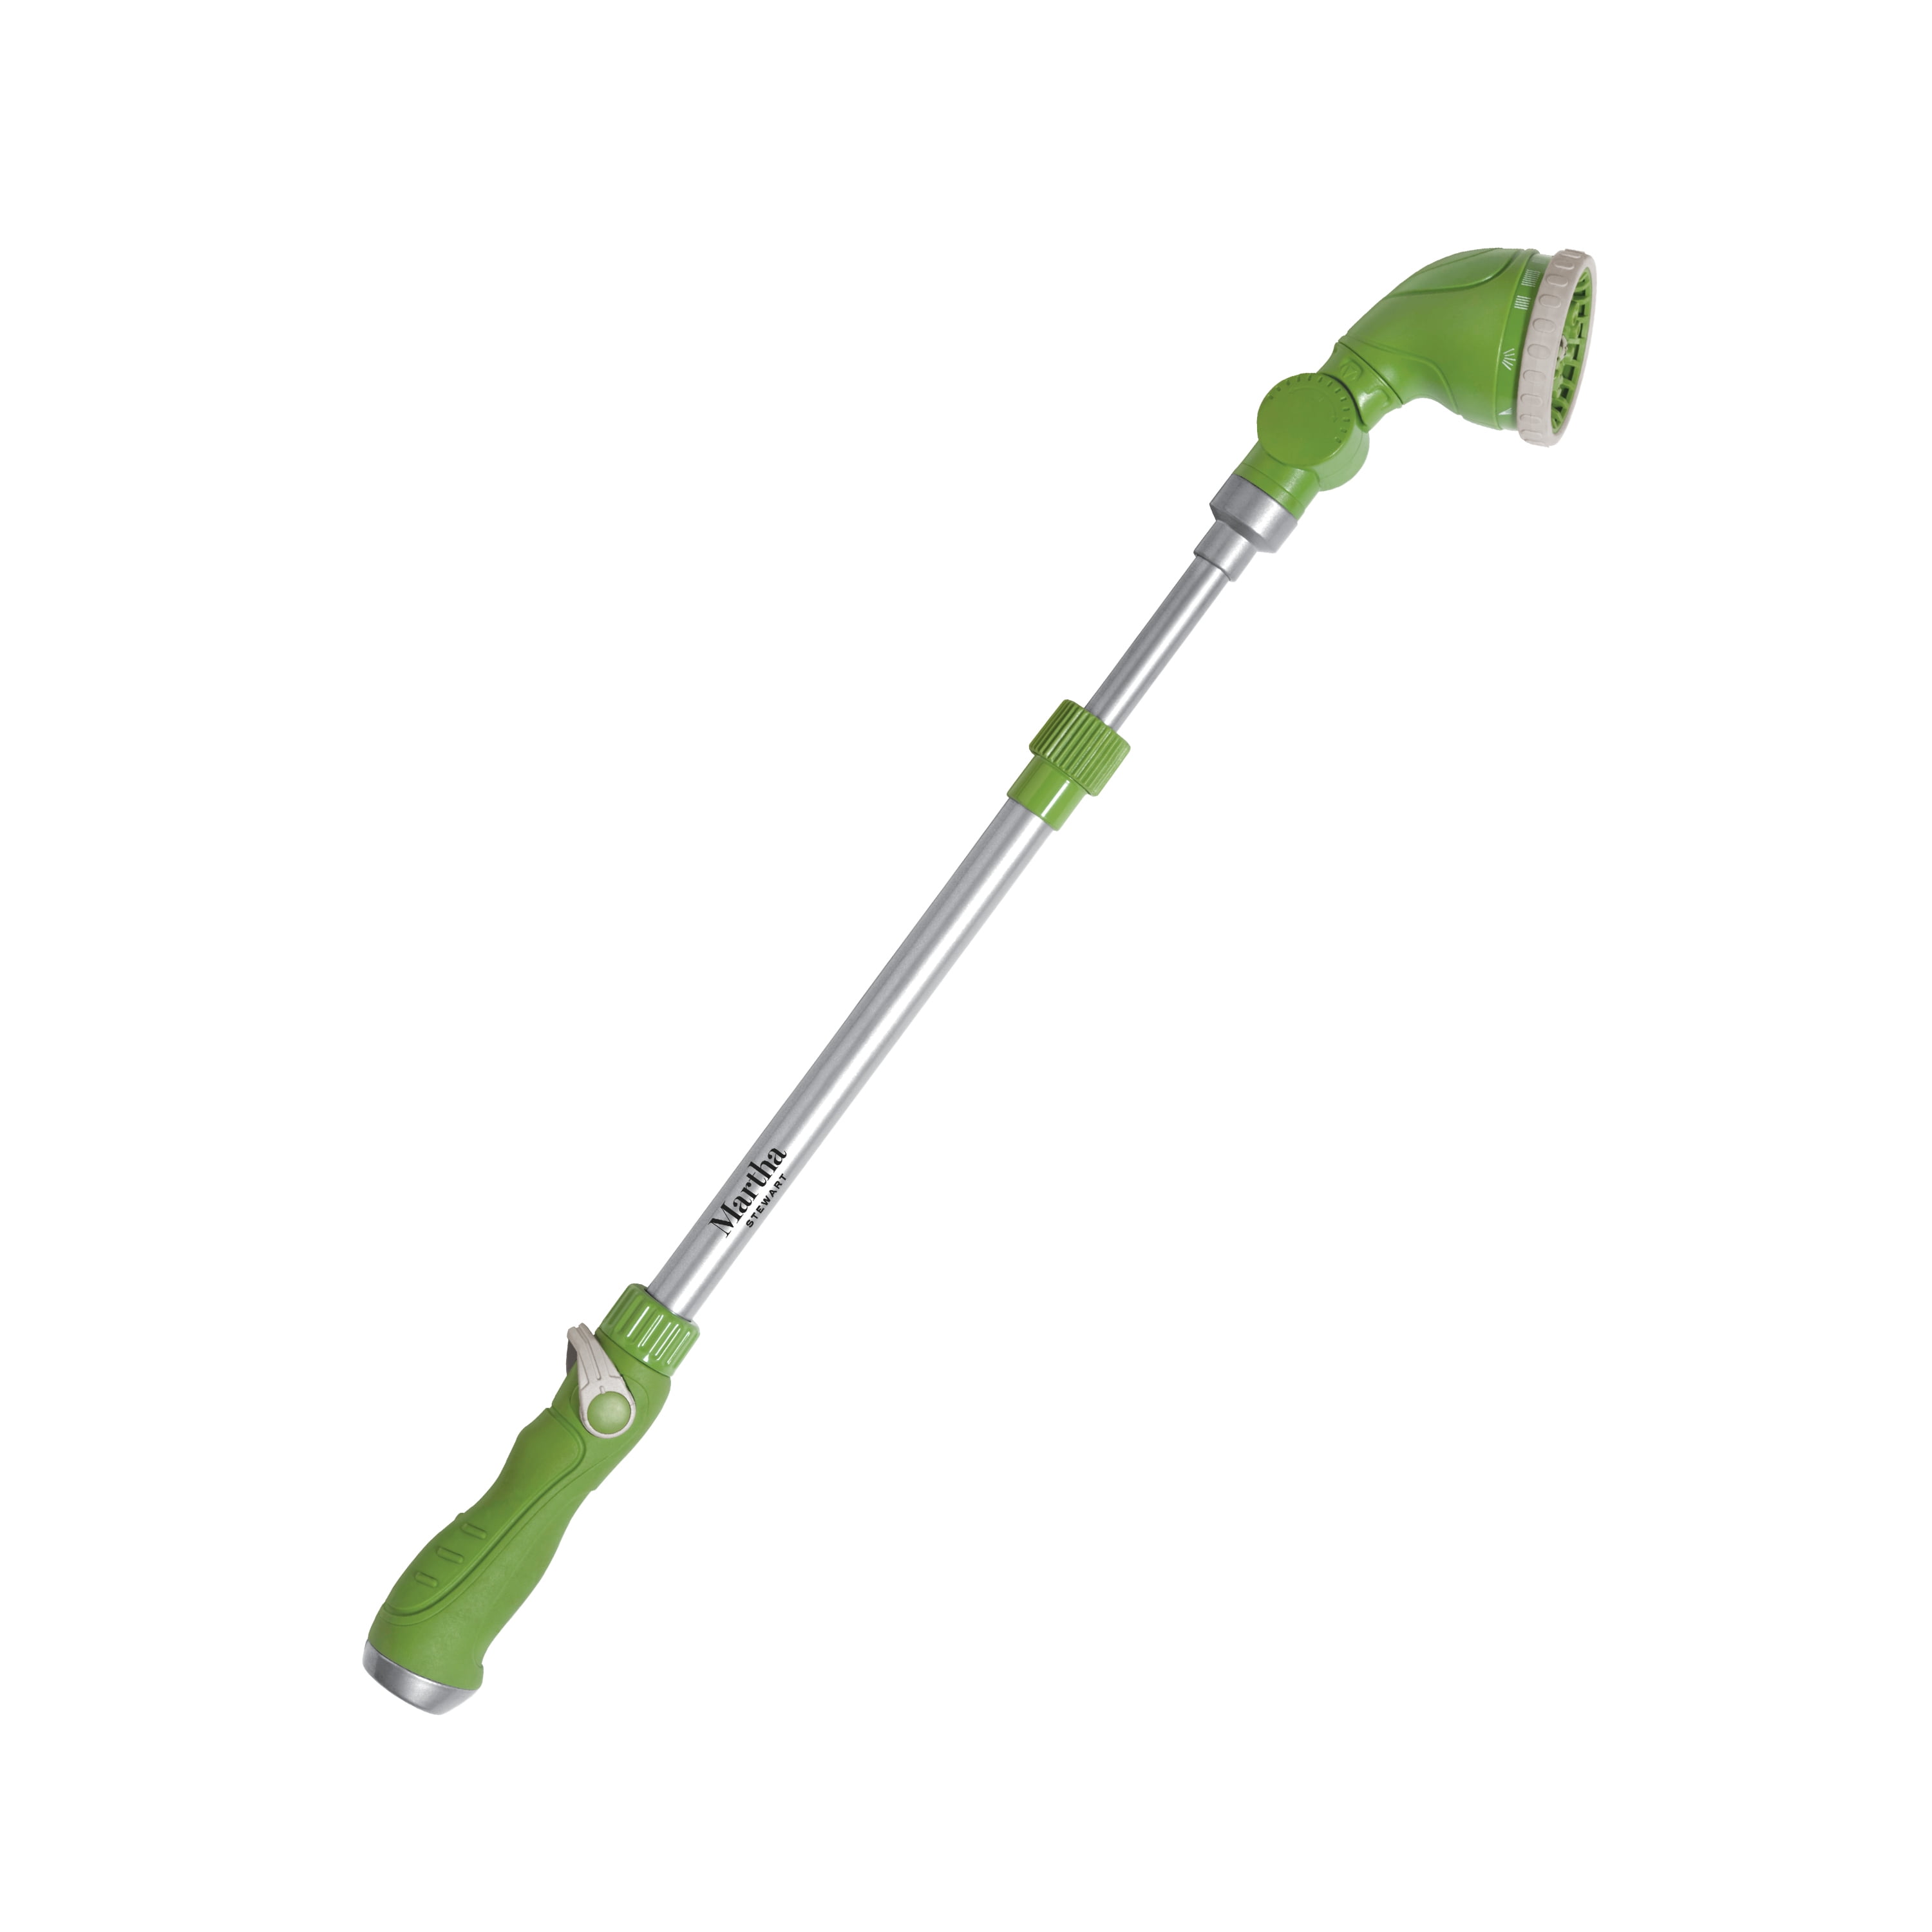 Melnor Watering Extension Wand 8 Pattern Lawn Garden Watering 33 inch 120 psi 